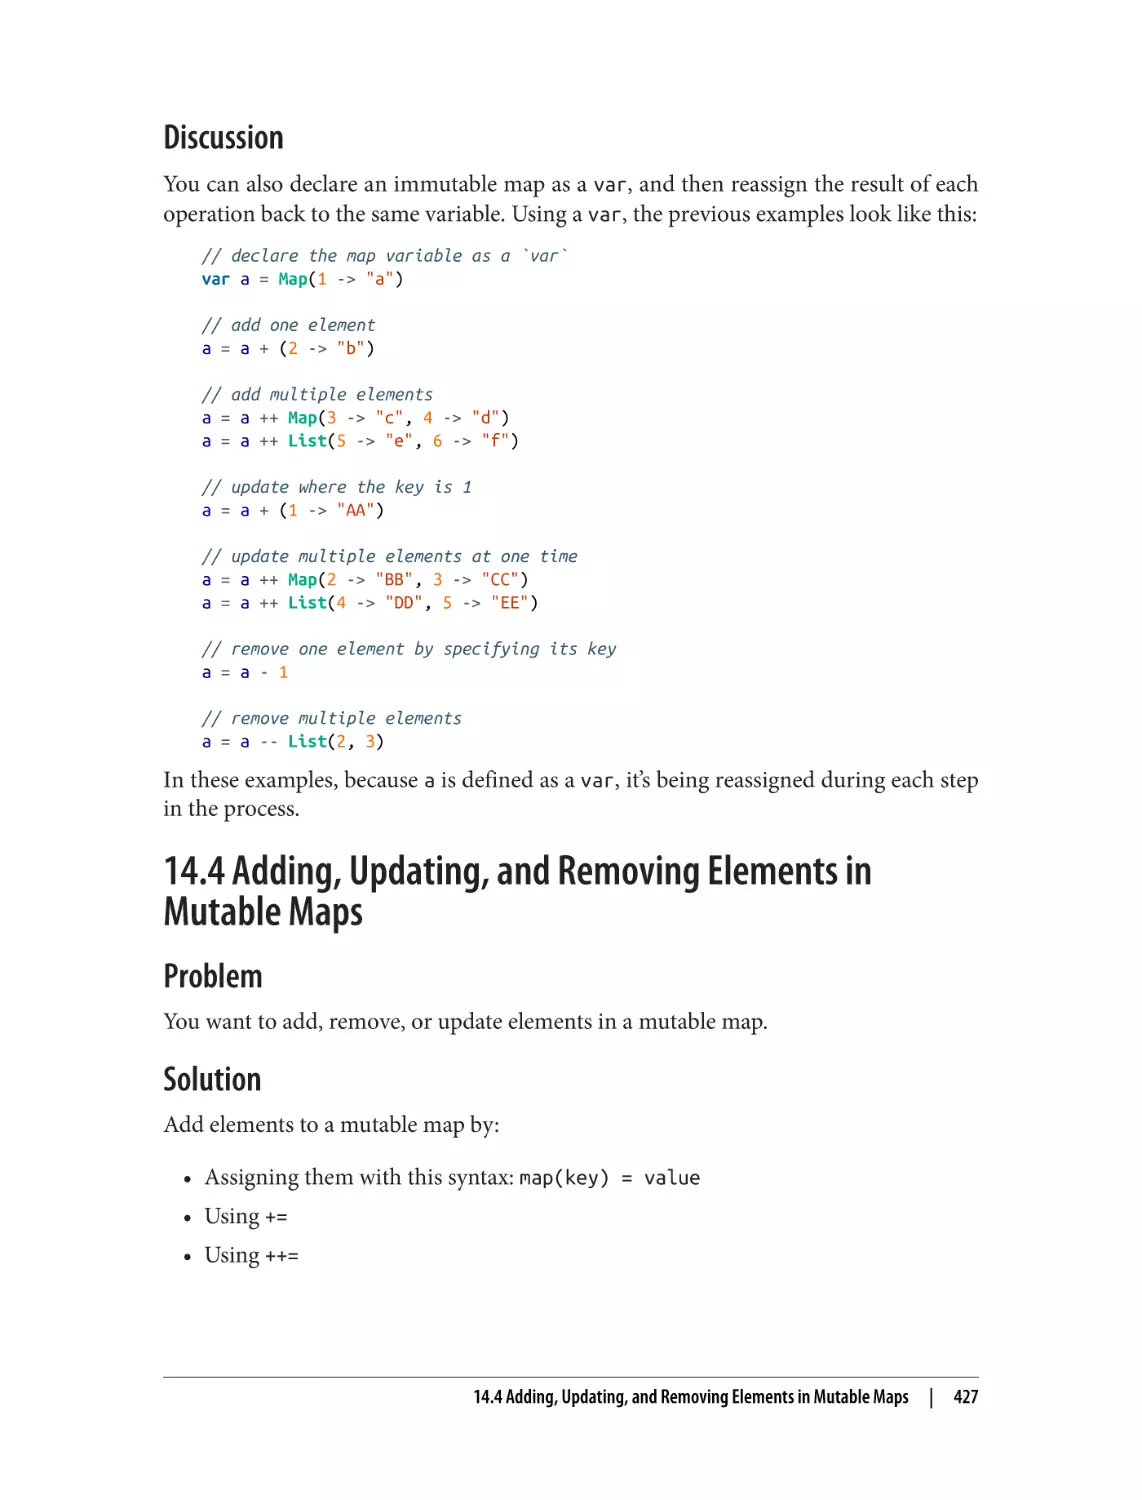 Discussion
14.4 Adding, Updating, and Removing Elements in Mutable Maps
Problem
Solution